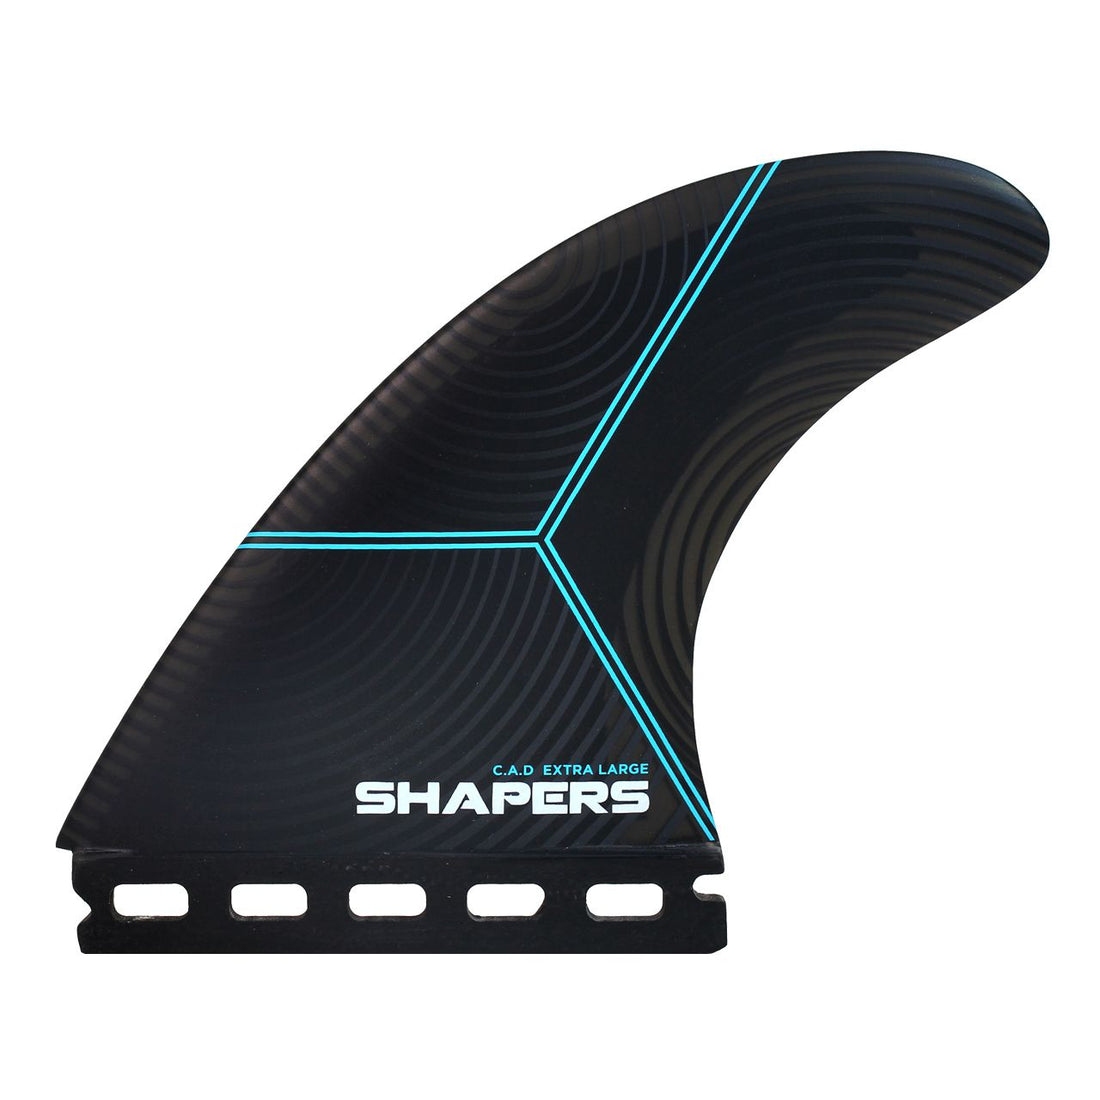 SHAPERS C.A.D XTRA LARGE 3-FIN SINGLE TAB BASE